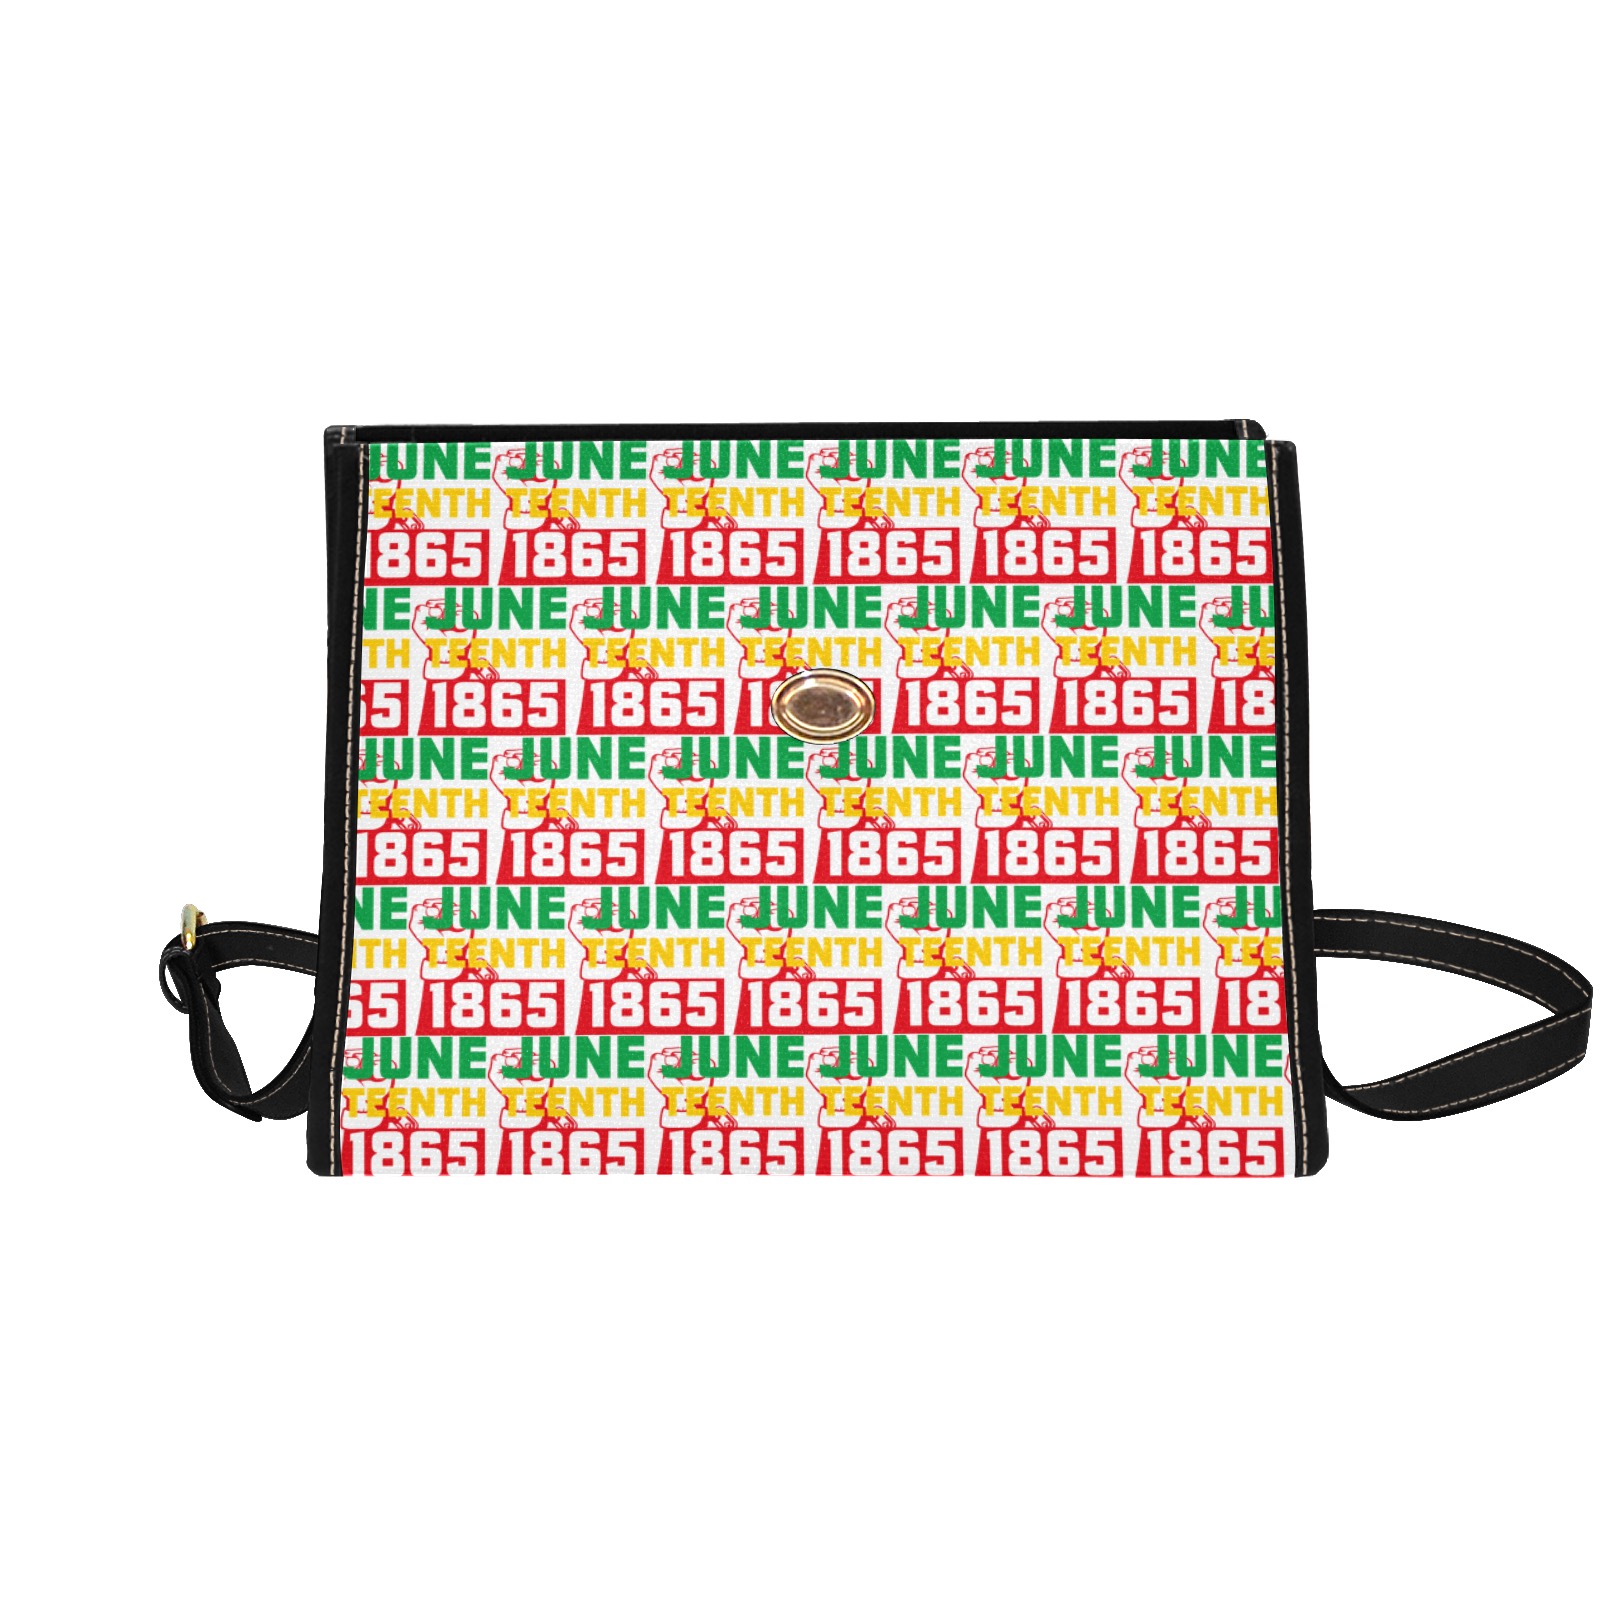 Juneteenth White Fist Purse Waterproof Canvas Bag-Black (All Over Print) (Model 1641)